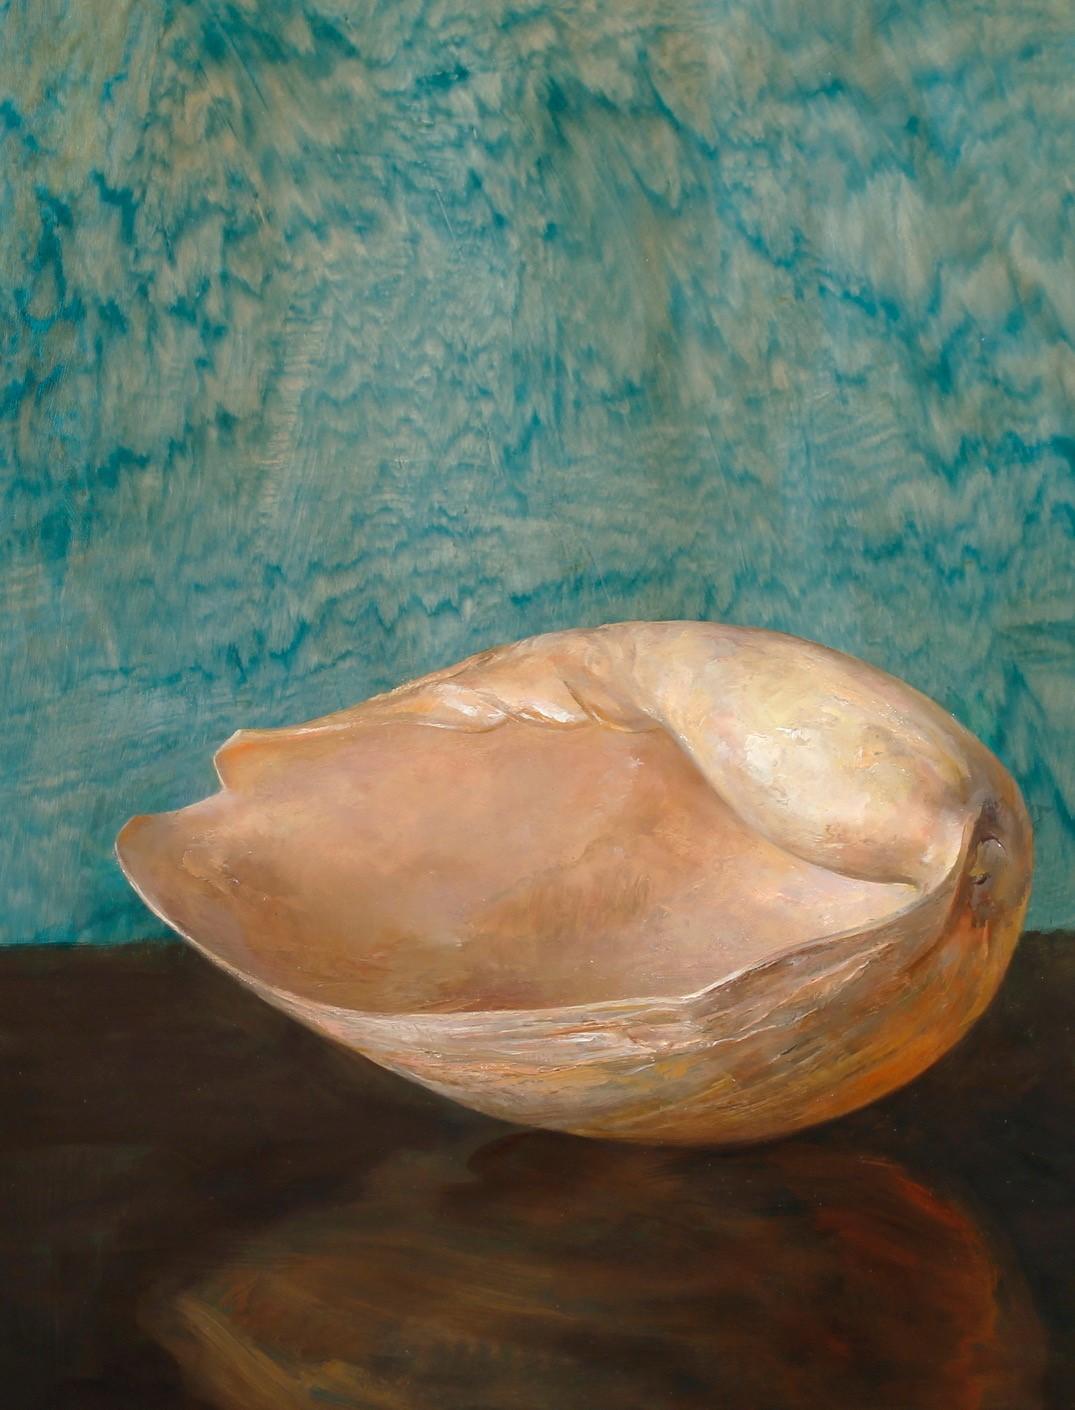 Bailer Shell - Single Bailer Sea Shell on Brown Table w/ Green Watered Backdrop - Painting by Helen Oh